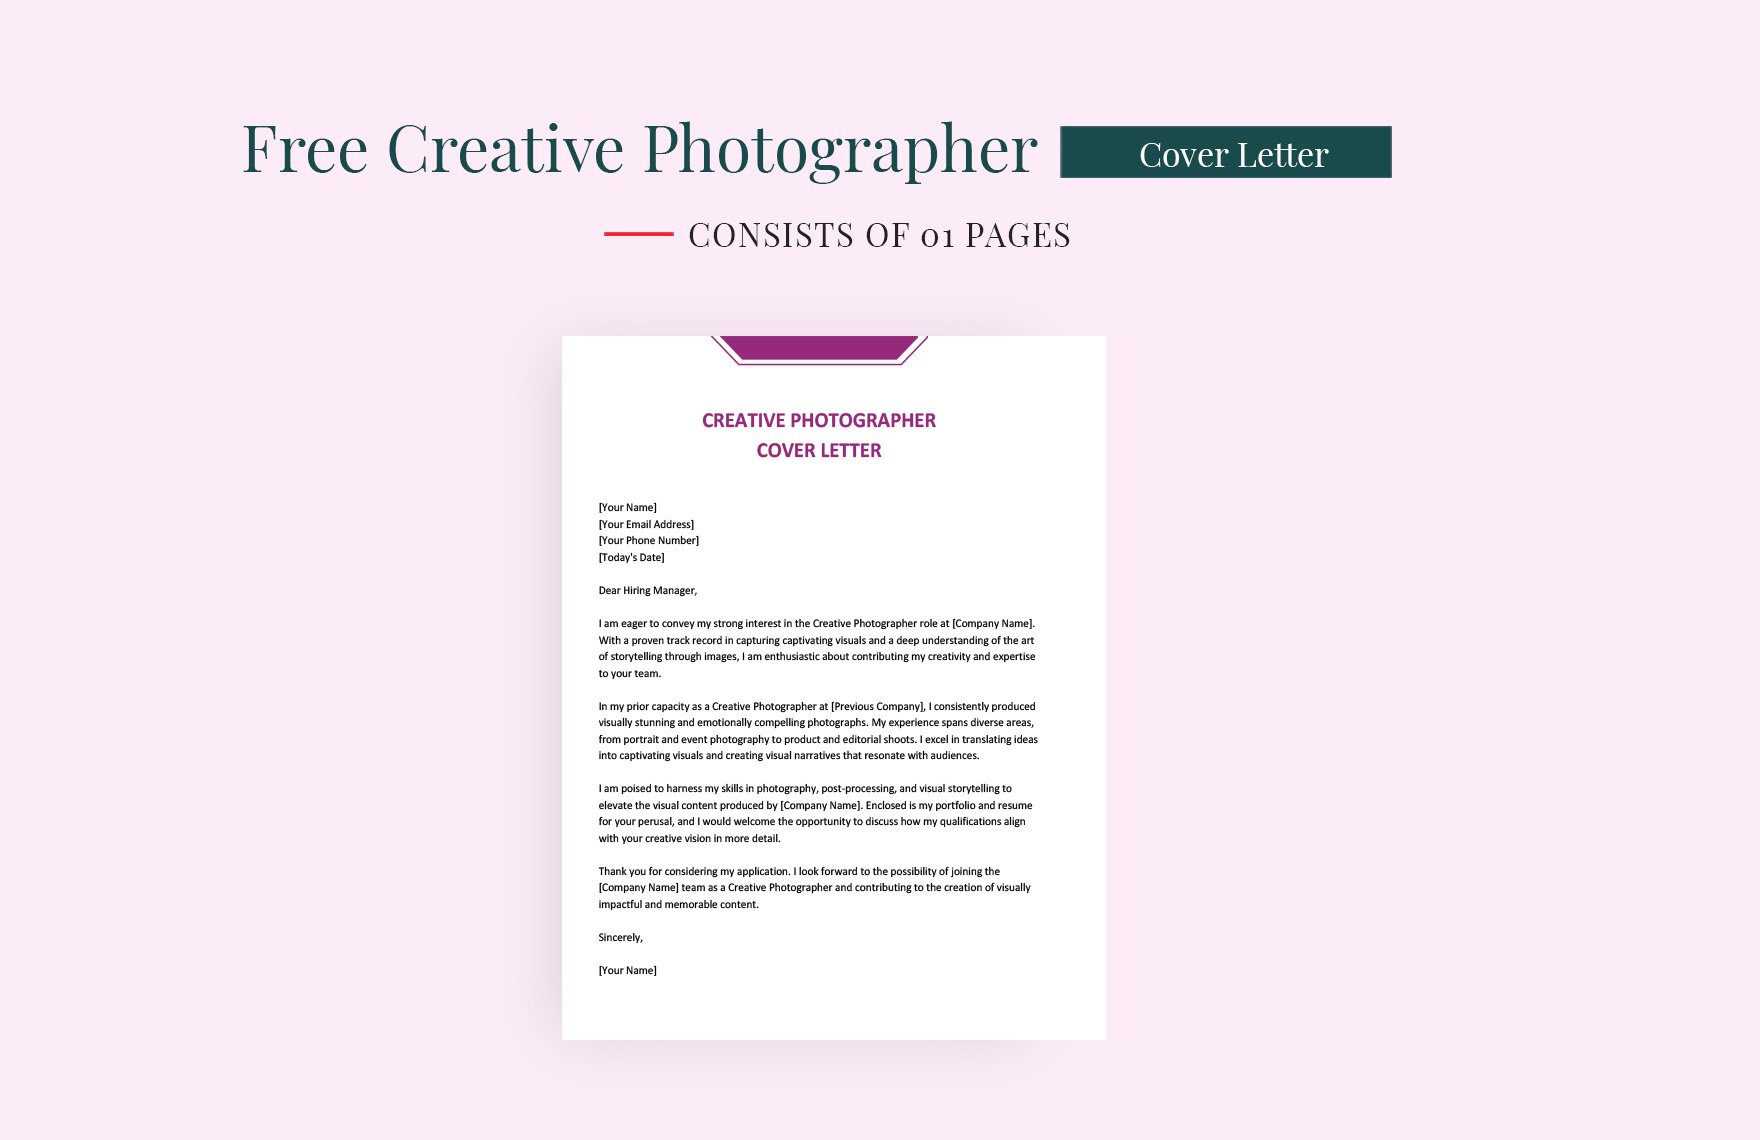 Creative Photographer Cover Letter in Word, Google Docs